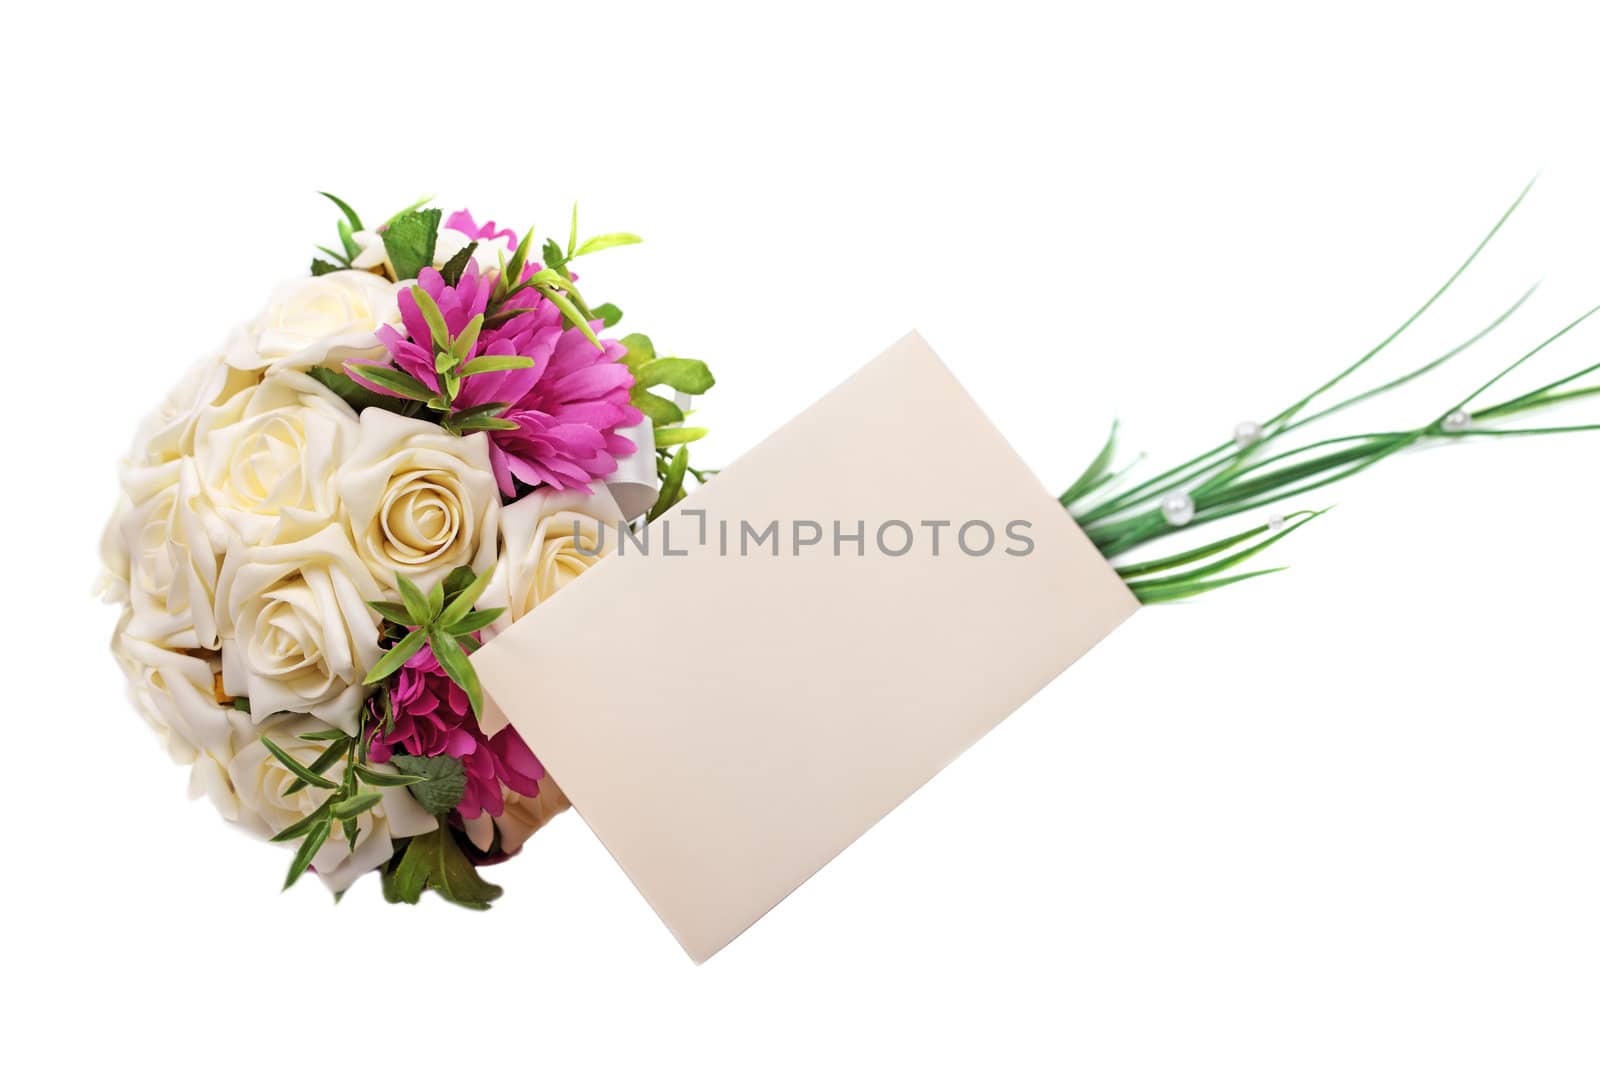 Wedding bouquet and blank envelope isolated on white background.